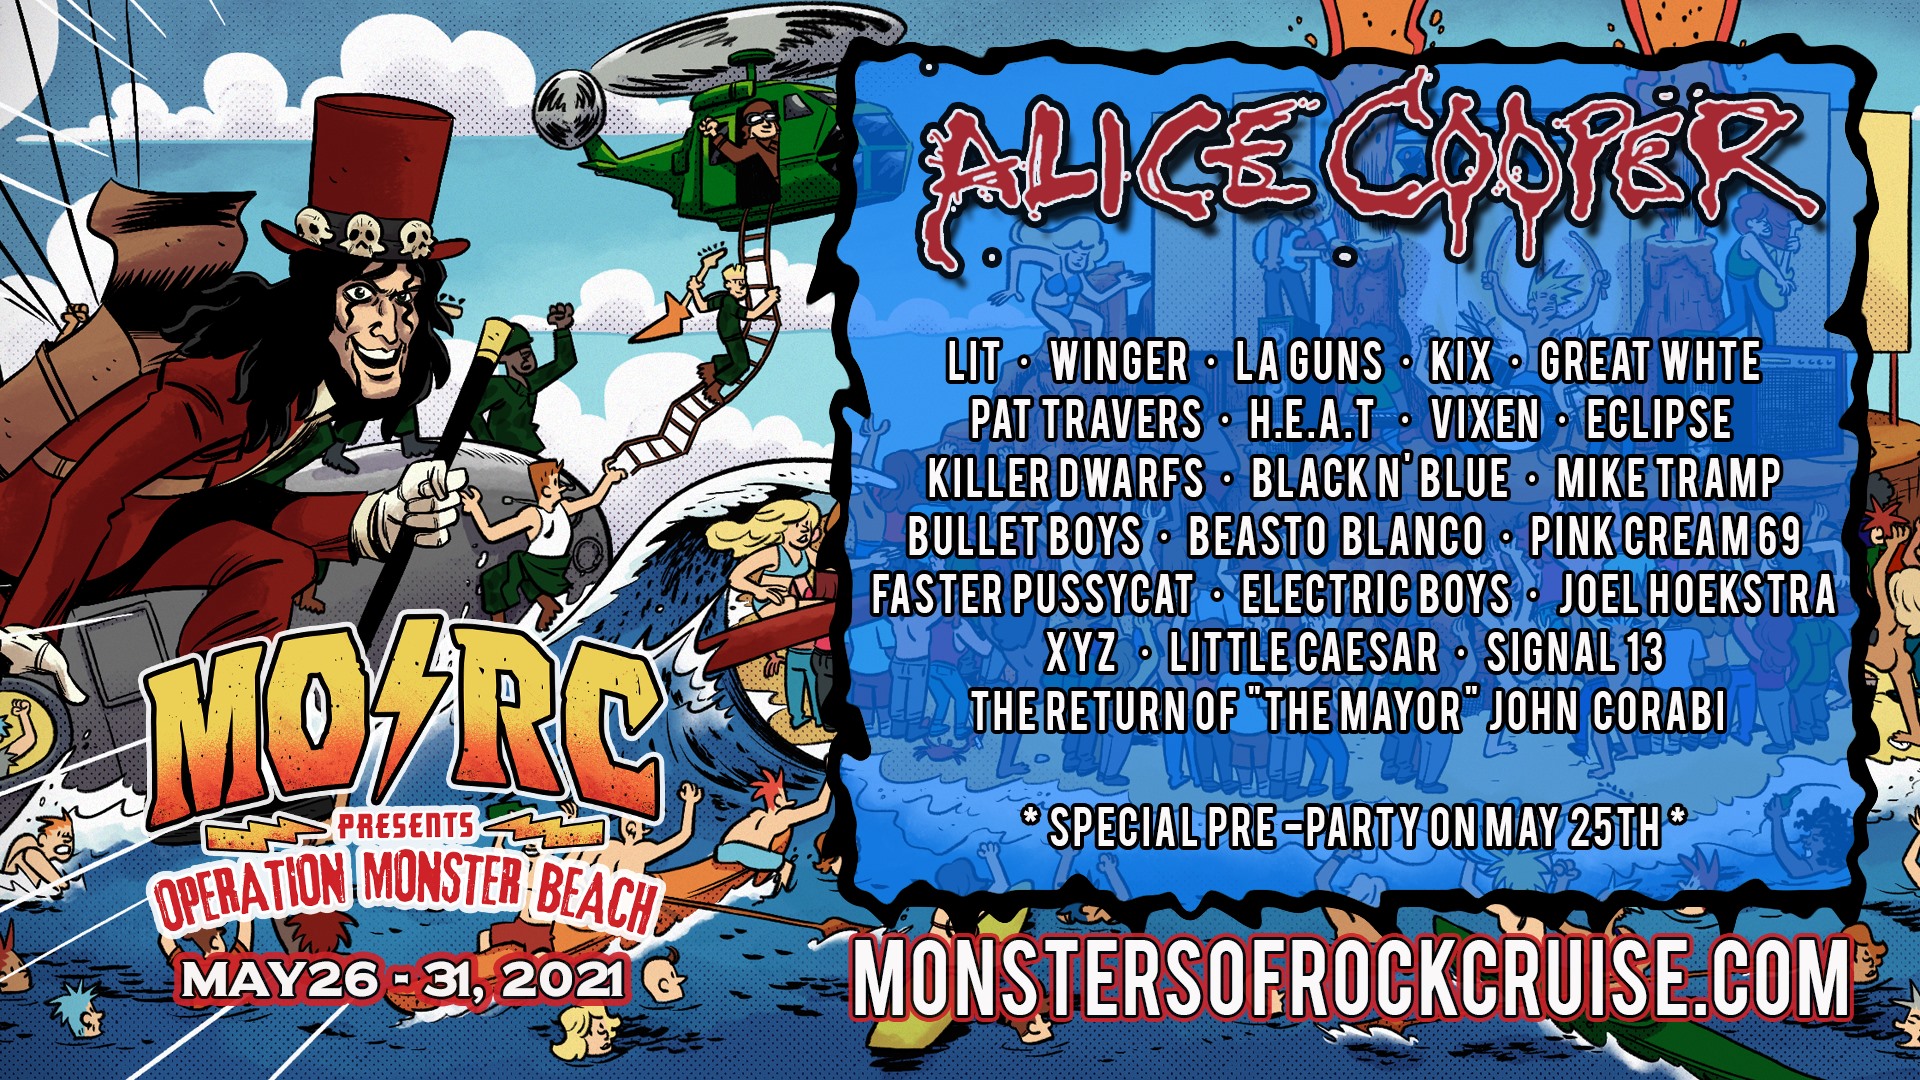 Monsters Of Rock Cruise Announces Music Festival In 2021 • TotalRock